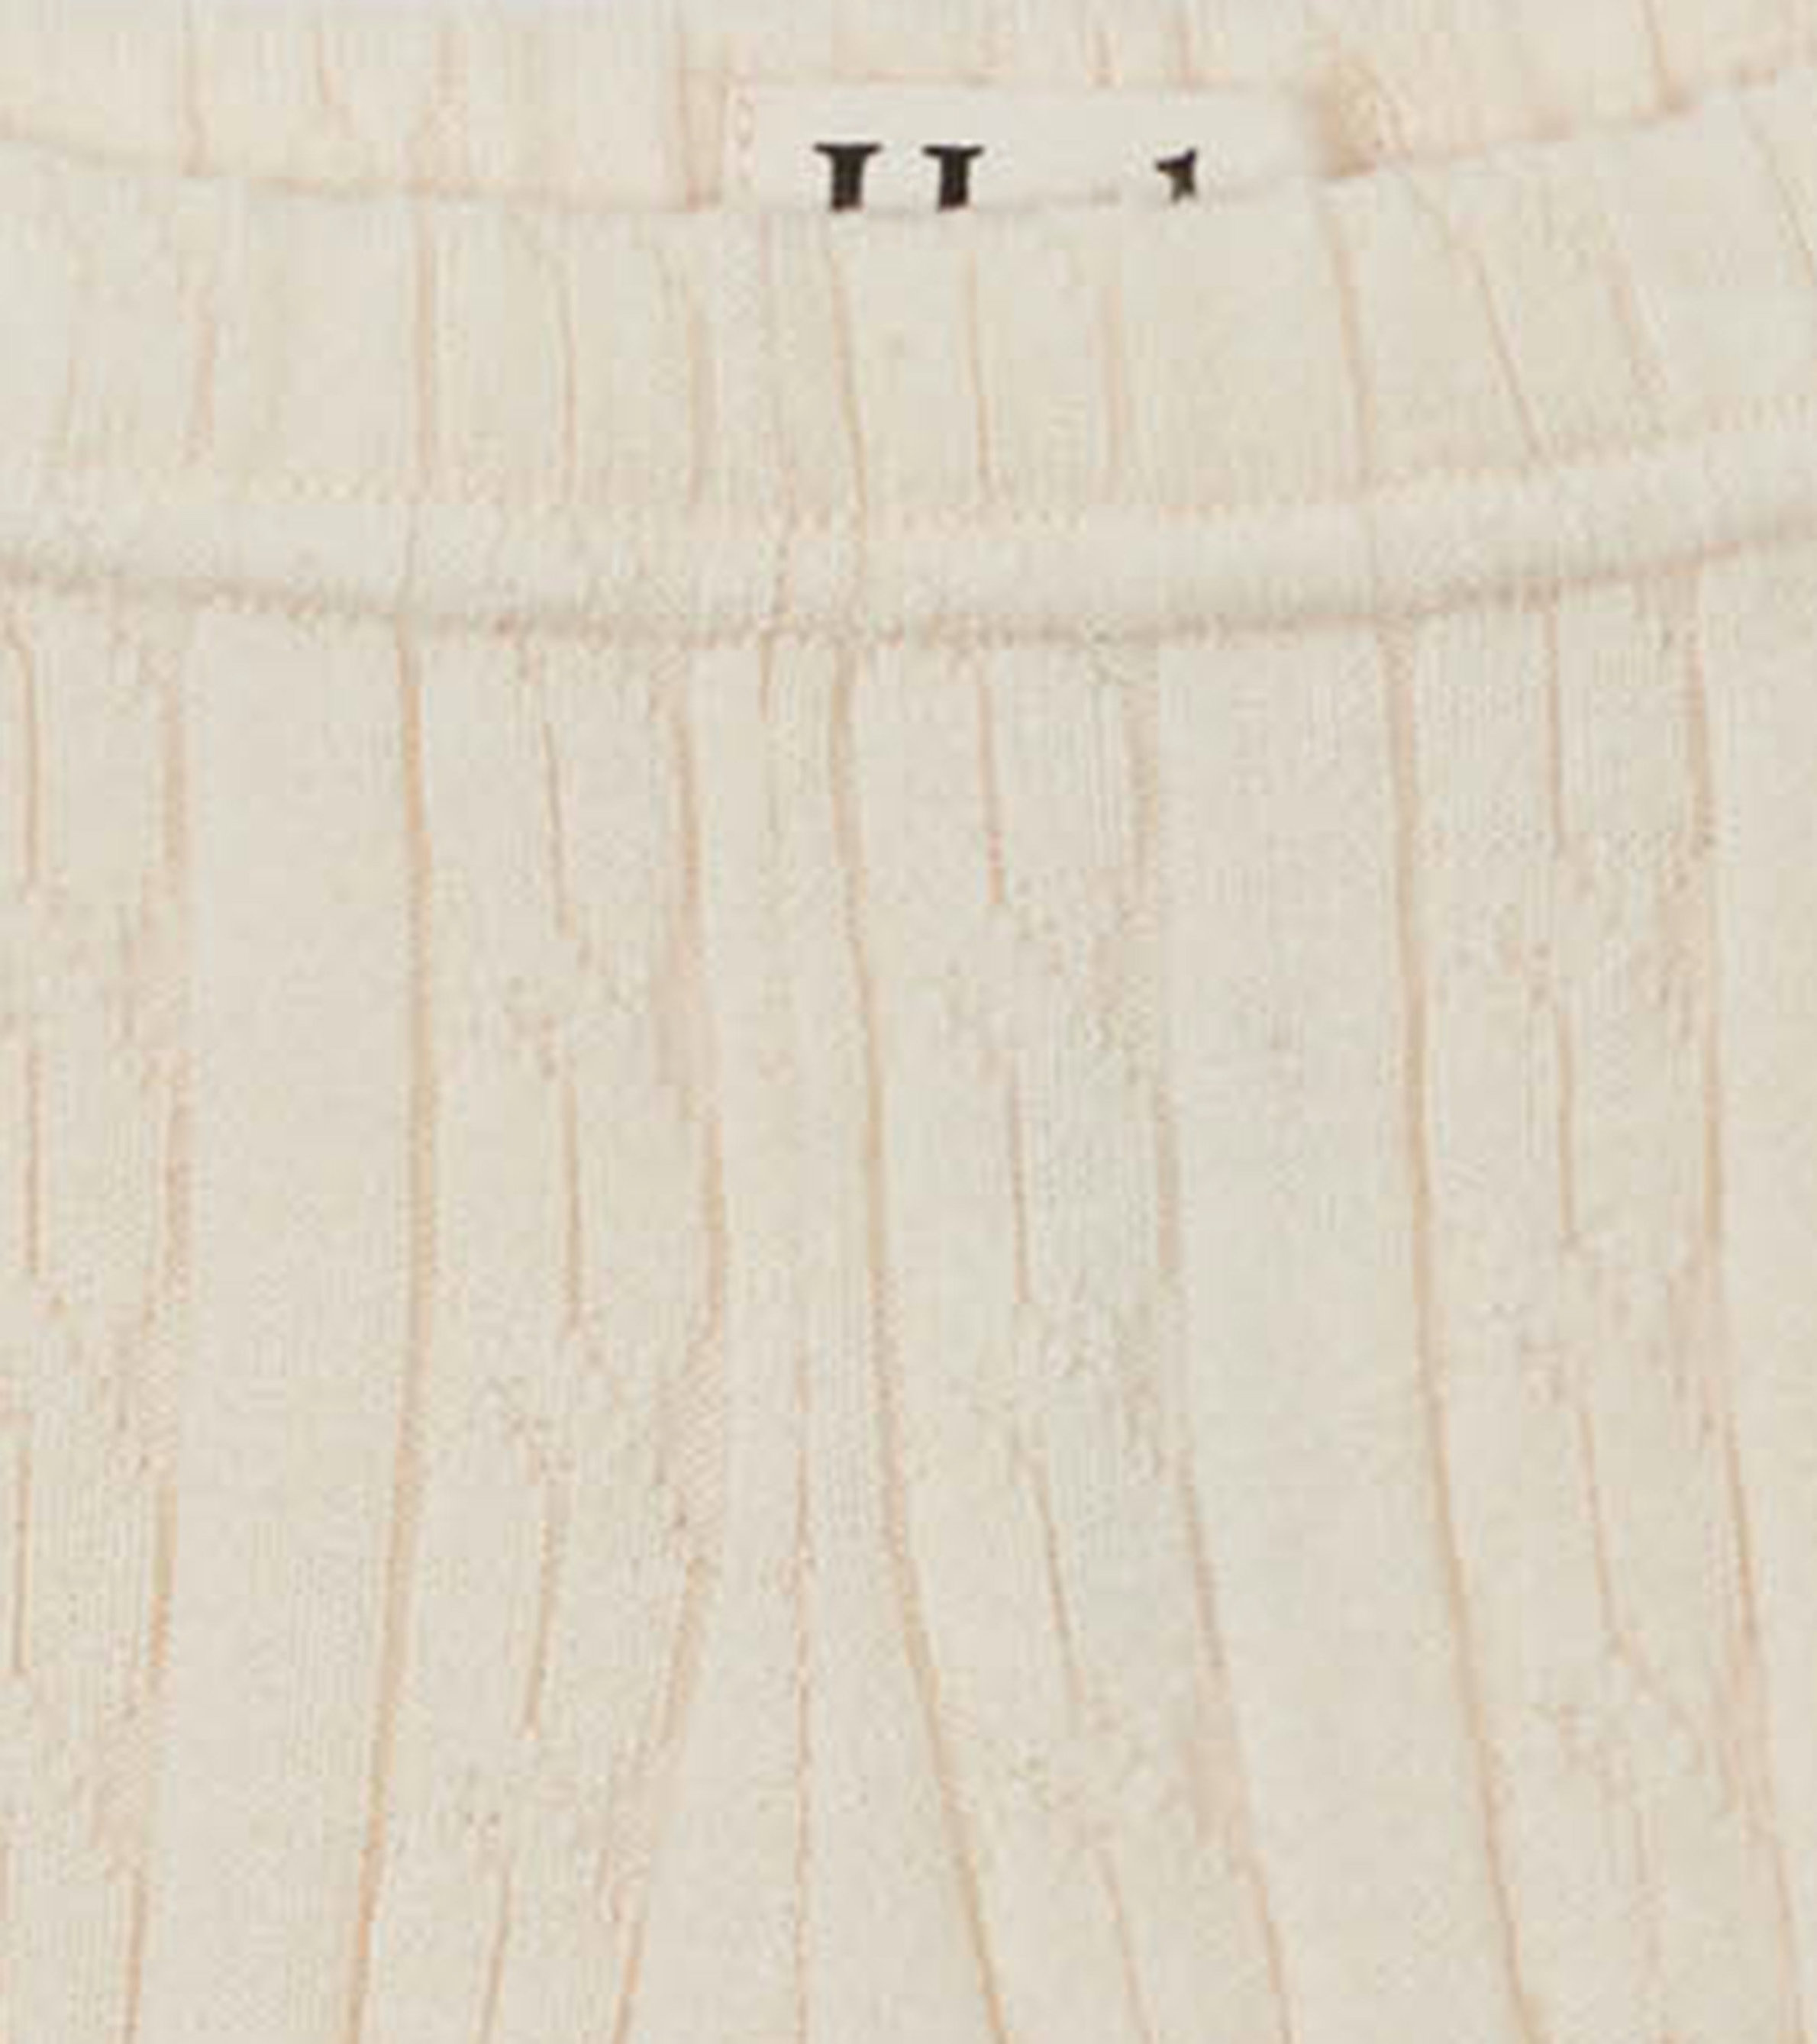 Baby Cream Cable Knit Tights - Hatley US